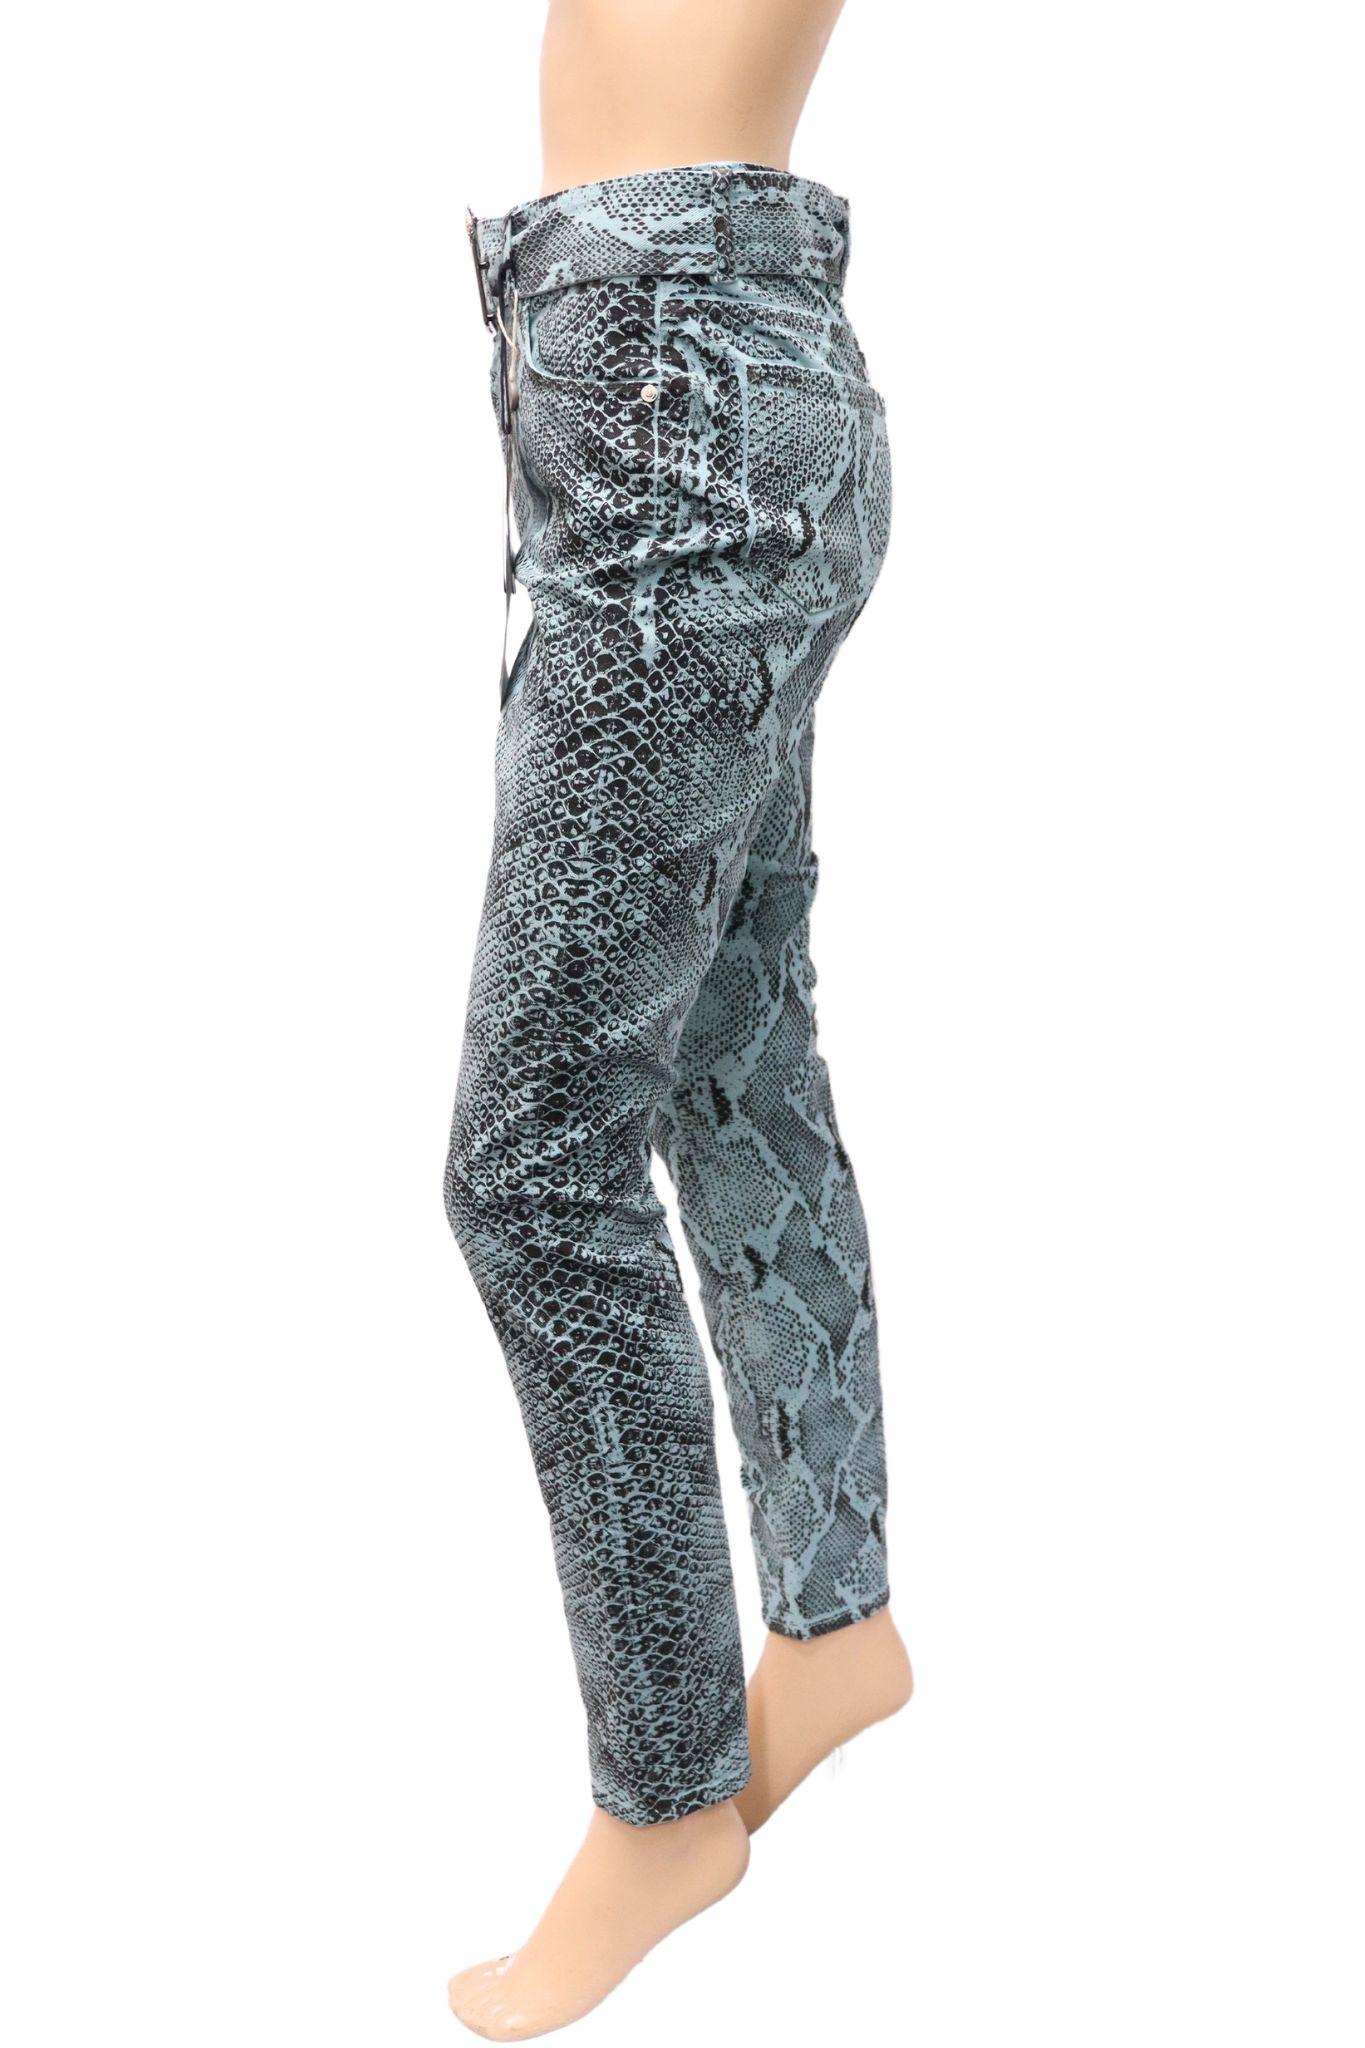 Just Cavalli NWT Snake Print Jeans - EU 26 For Sale 1